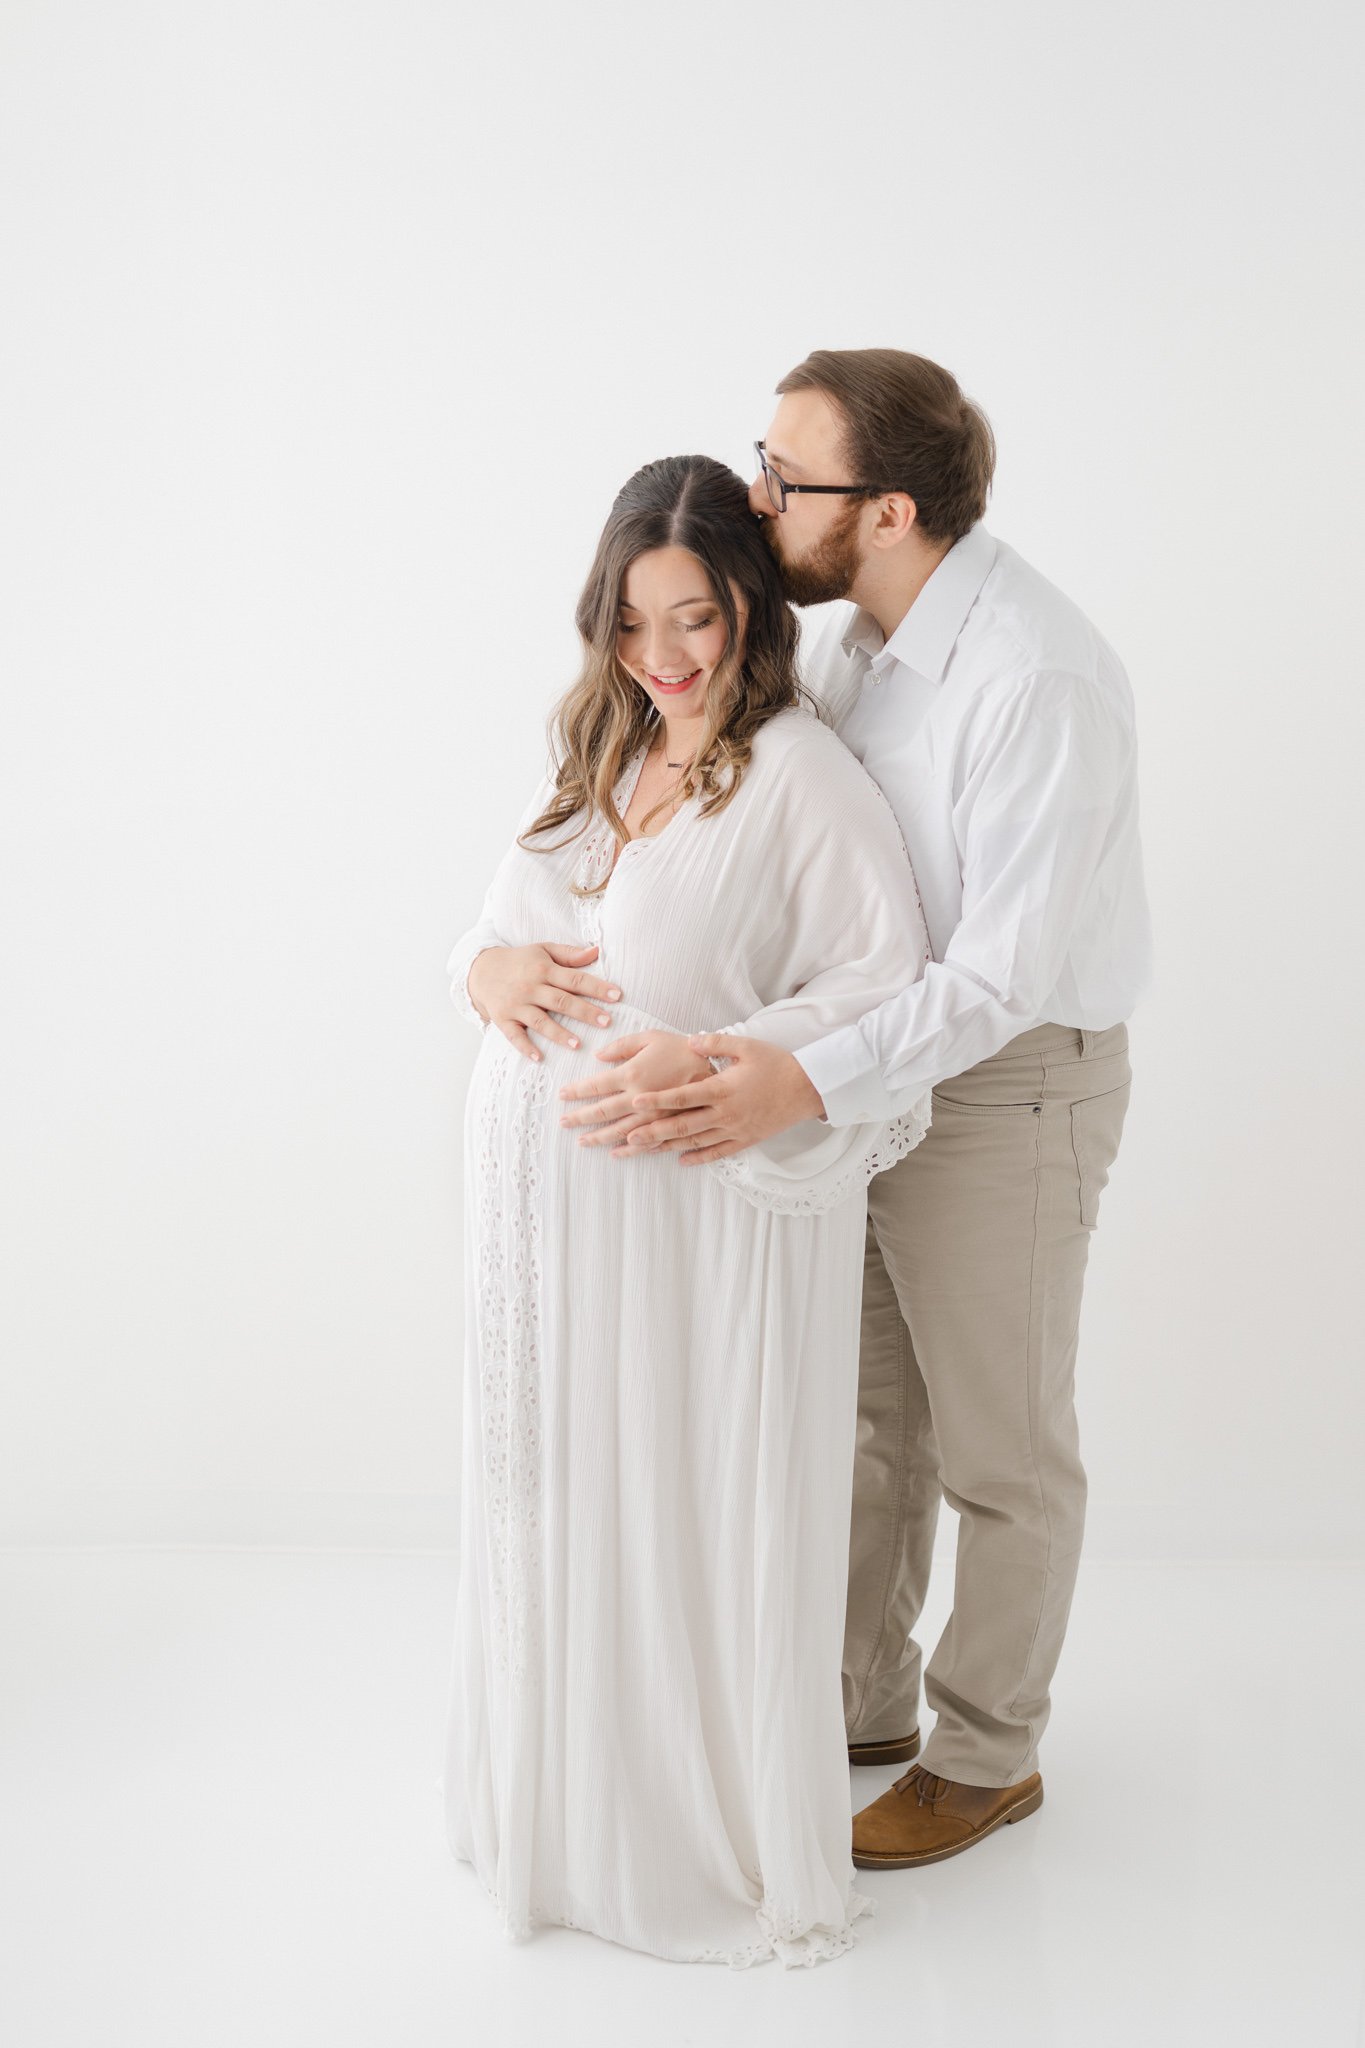  A husband and wife cuddle together during a studio session with Nicole Hawkins Photography. studio photographers modern maternity portraits #NicoleHawkinsPhotography #NicoleHawkinsMaternity #Babyontheway #studiomaternityNJ #whitestudiomaternityportr